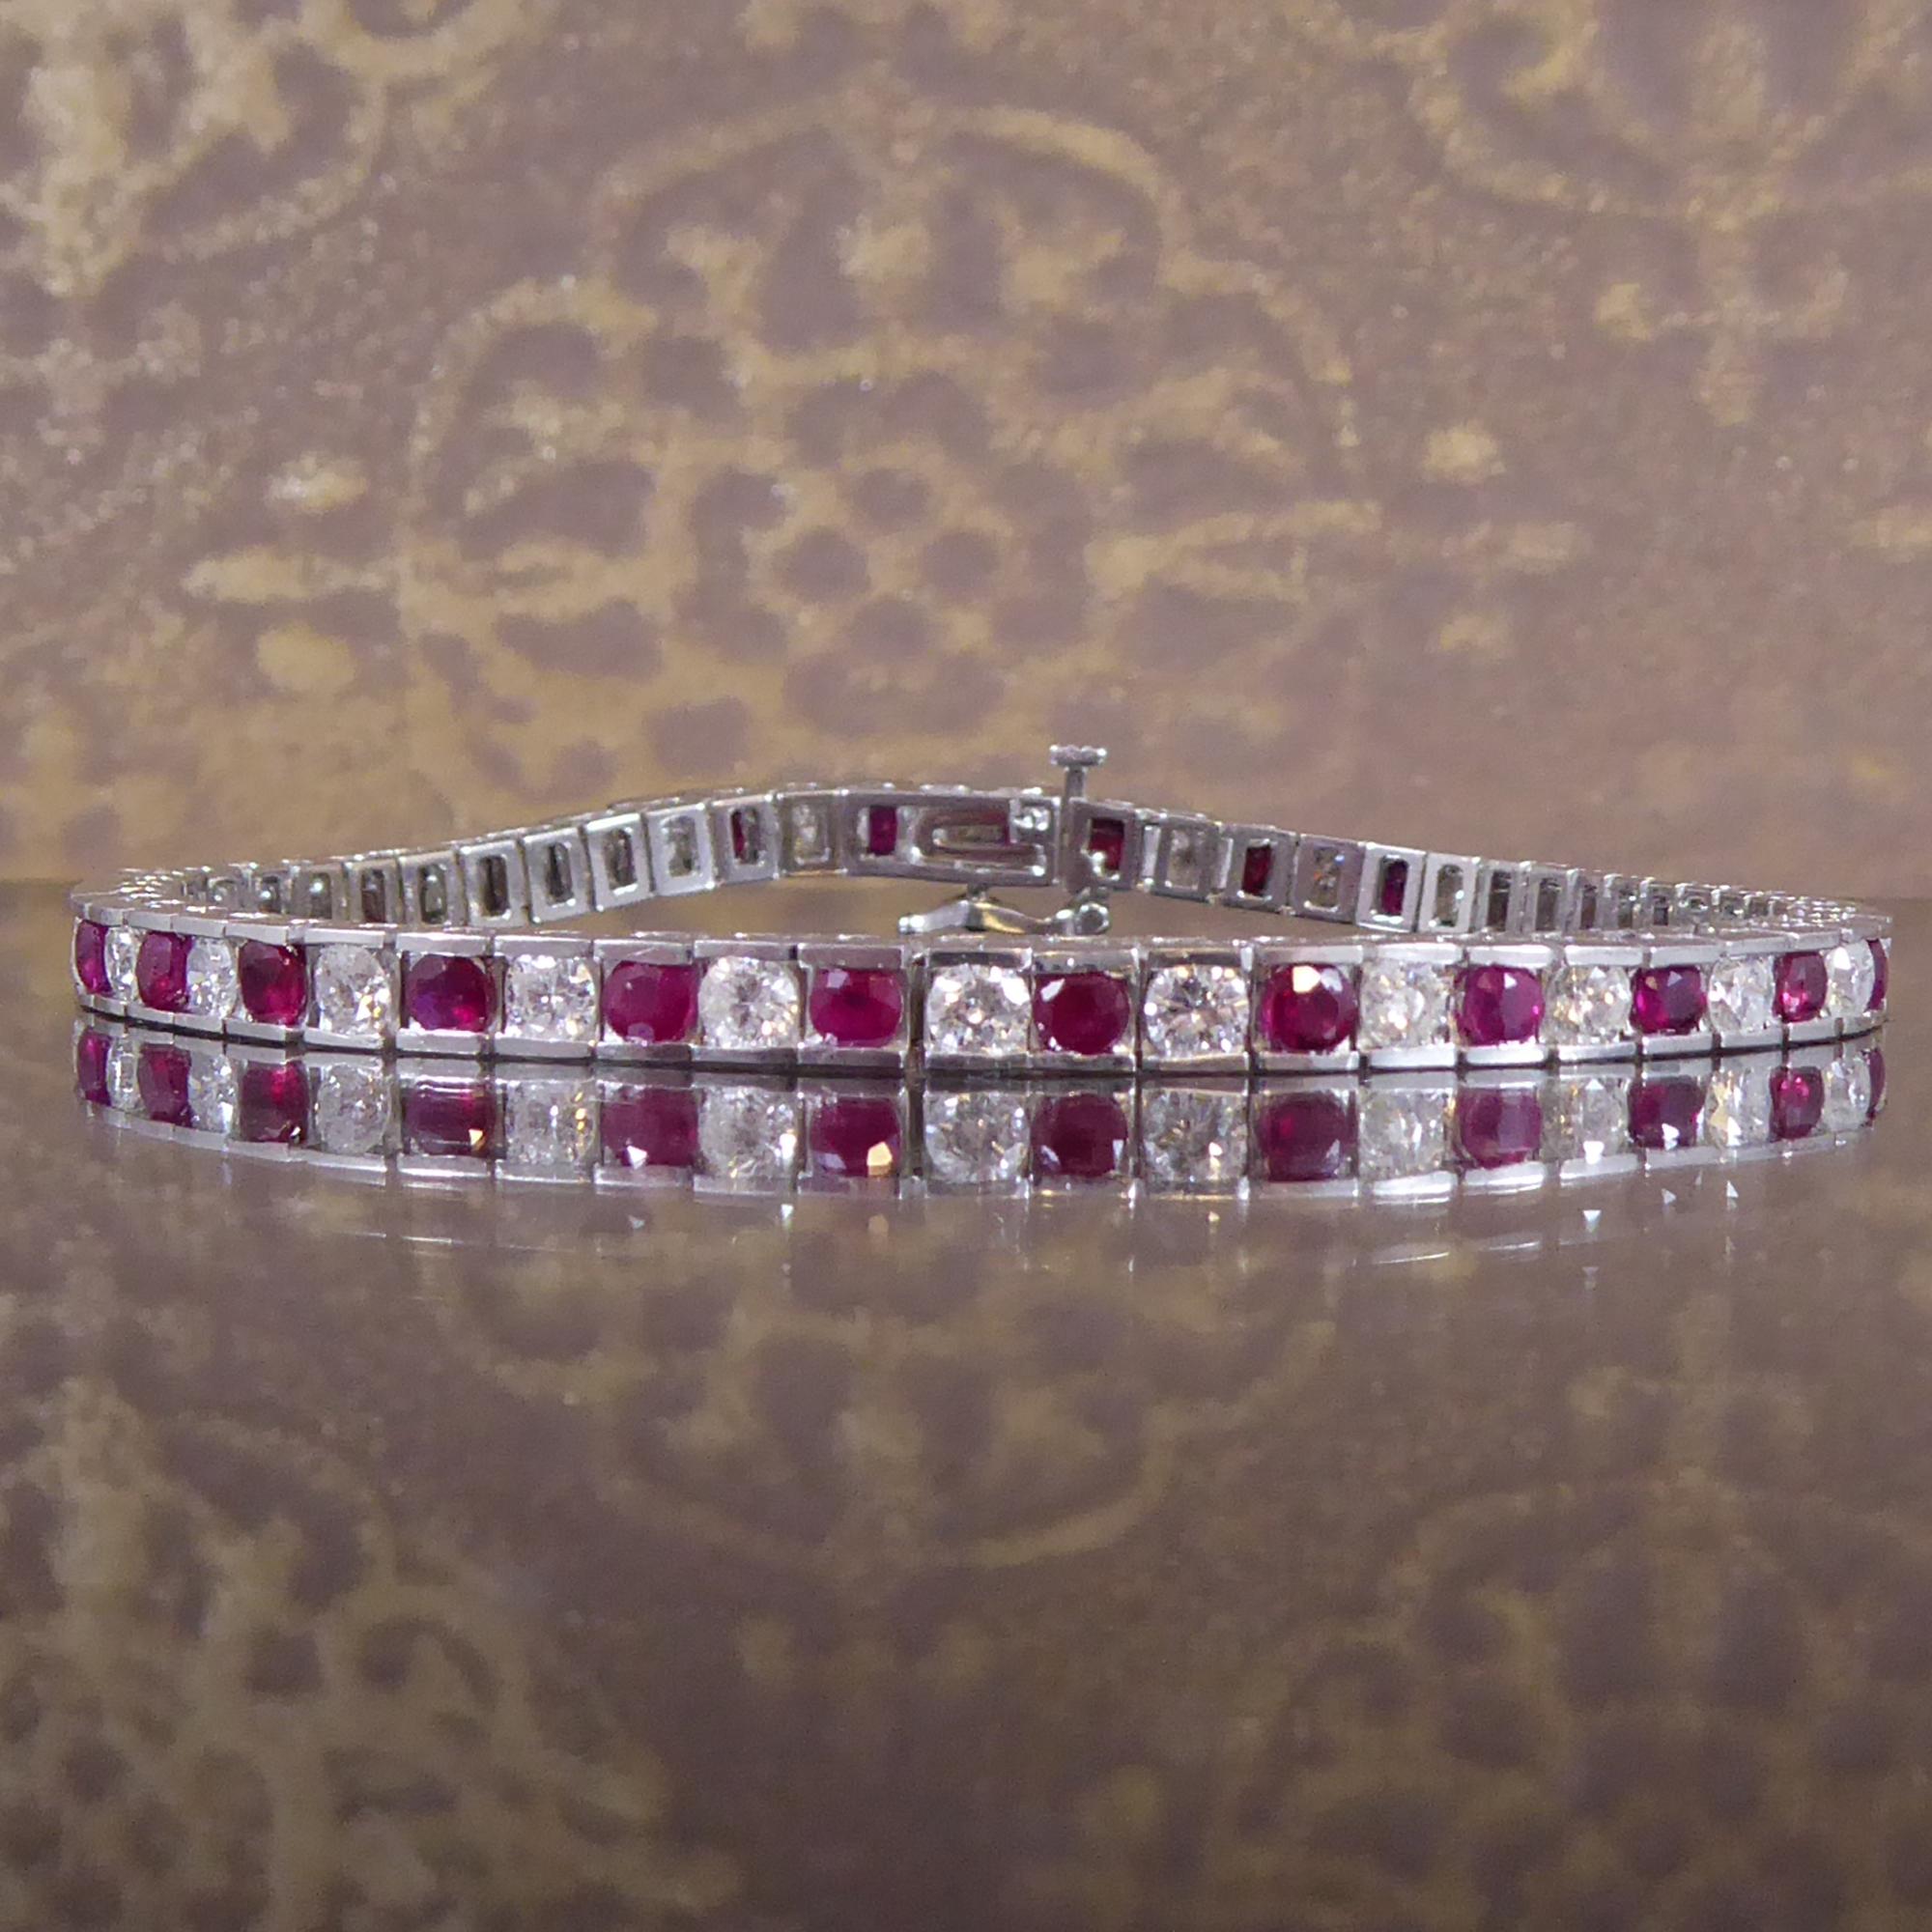 A pre-owned ruby and diamond tennis bracelet resplendent with 29 round, mixed cut rubies of medium to dark colour channel set into articulated rectangular settings and alternating with 28 round brilliant cut diamonds.  The rubies, which measure